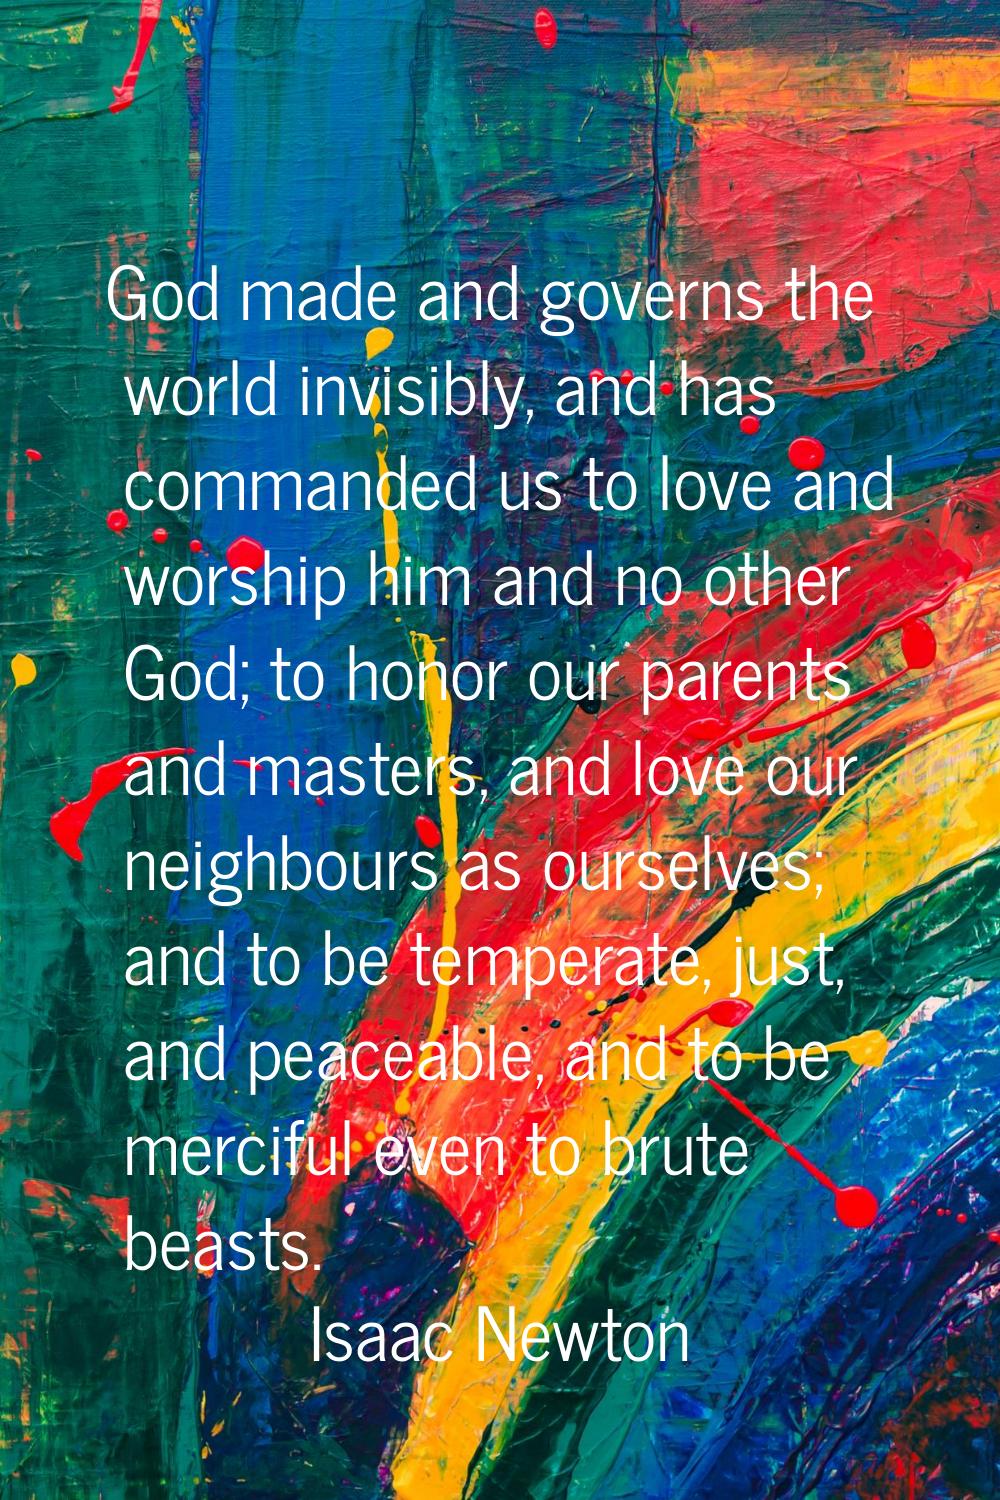 God made and governs the world invisibly, and has commanded us to love and worship him and no other